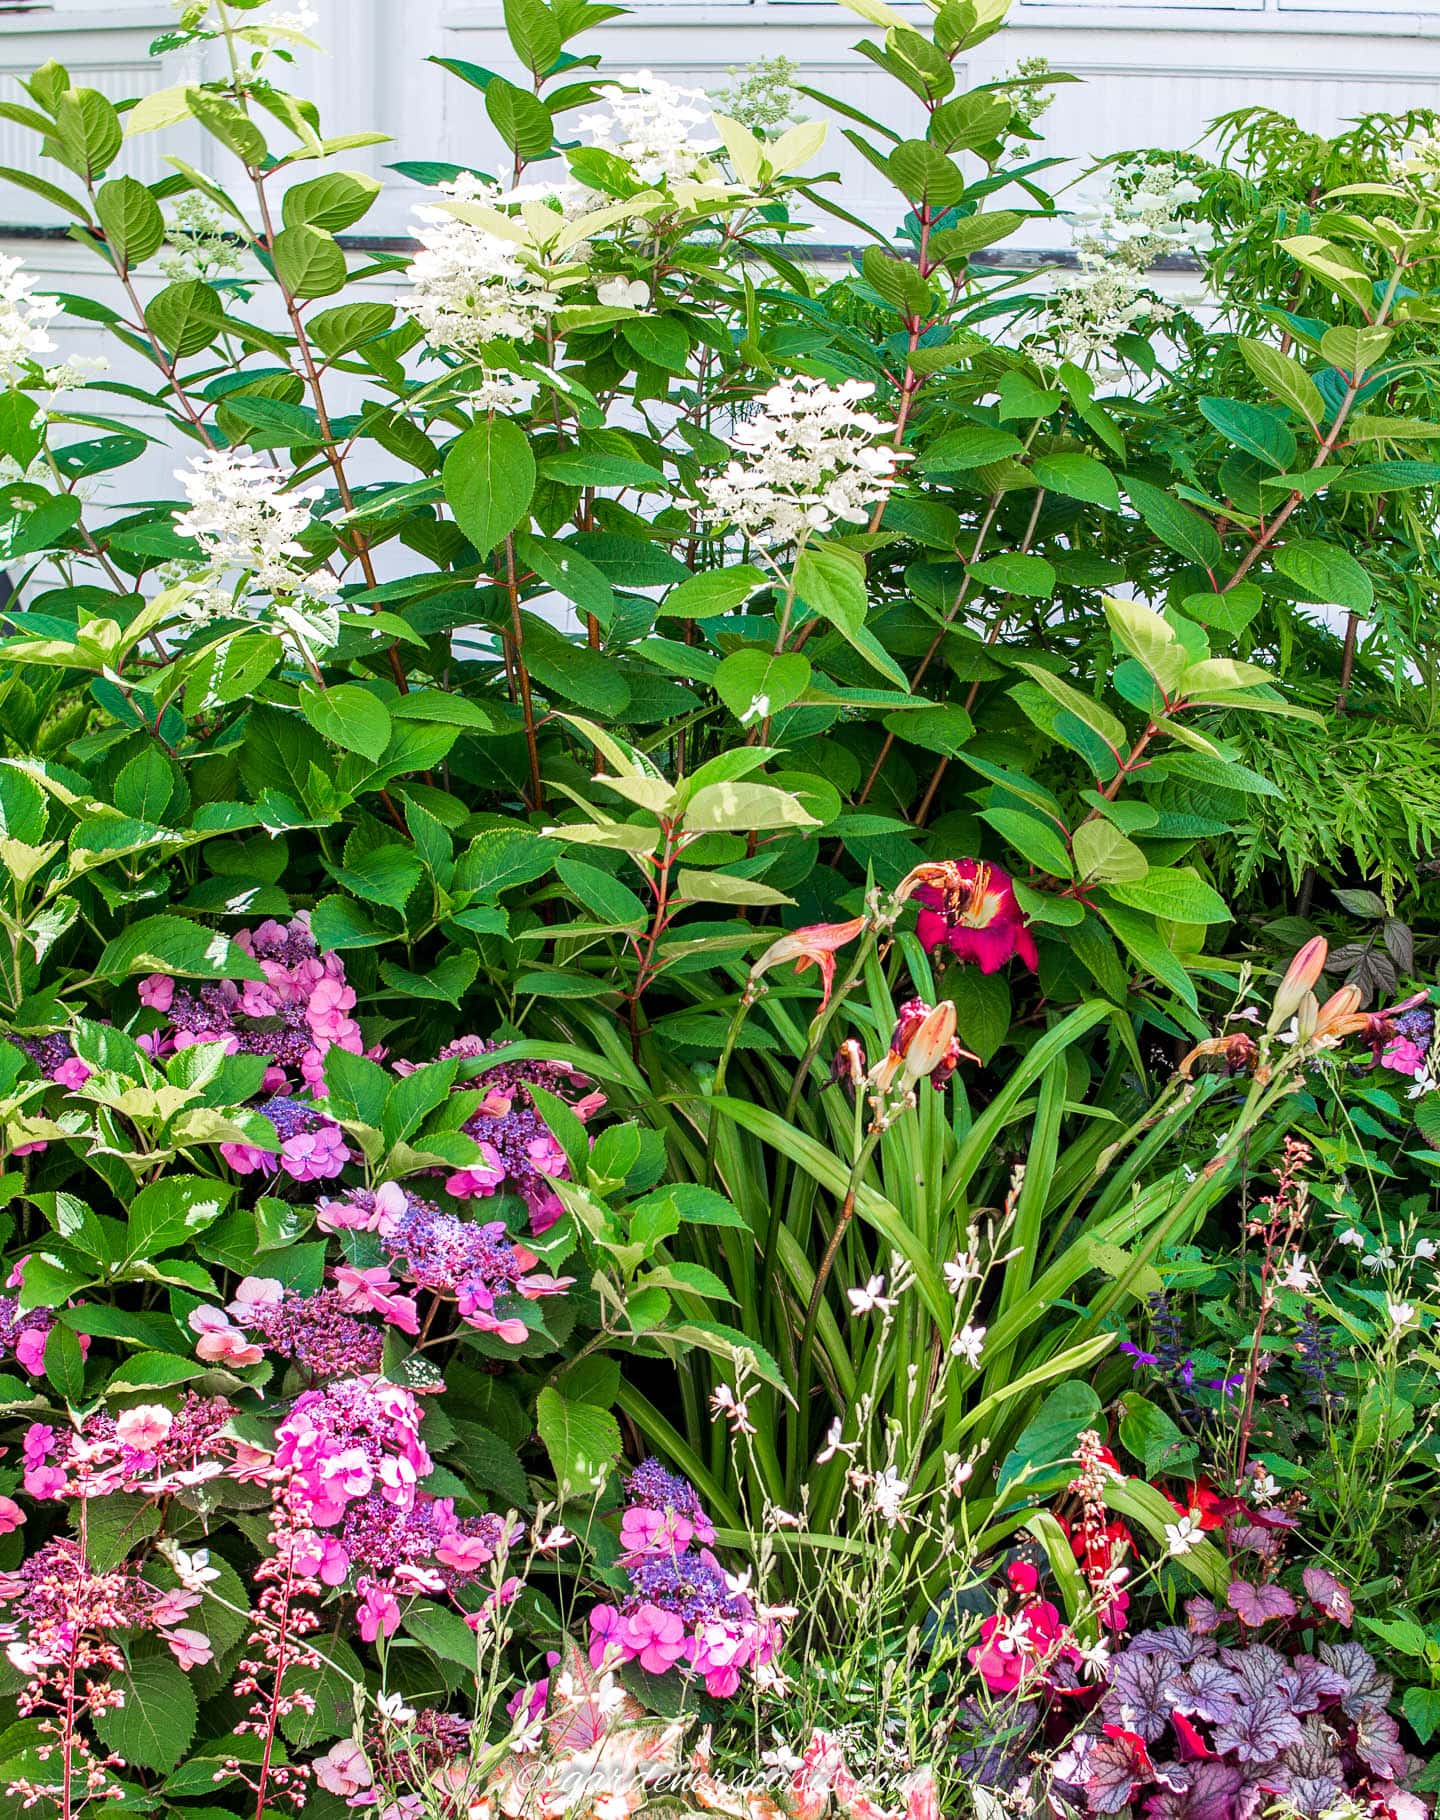 Tuff Stuff Hydrangea and Panicle Hydrangea planted with daylilies and coral bells